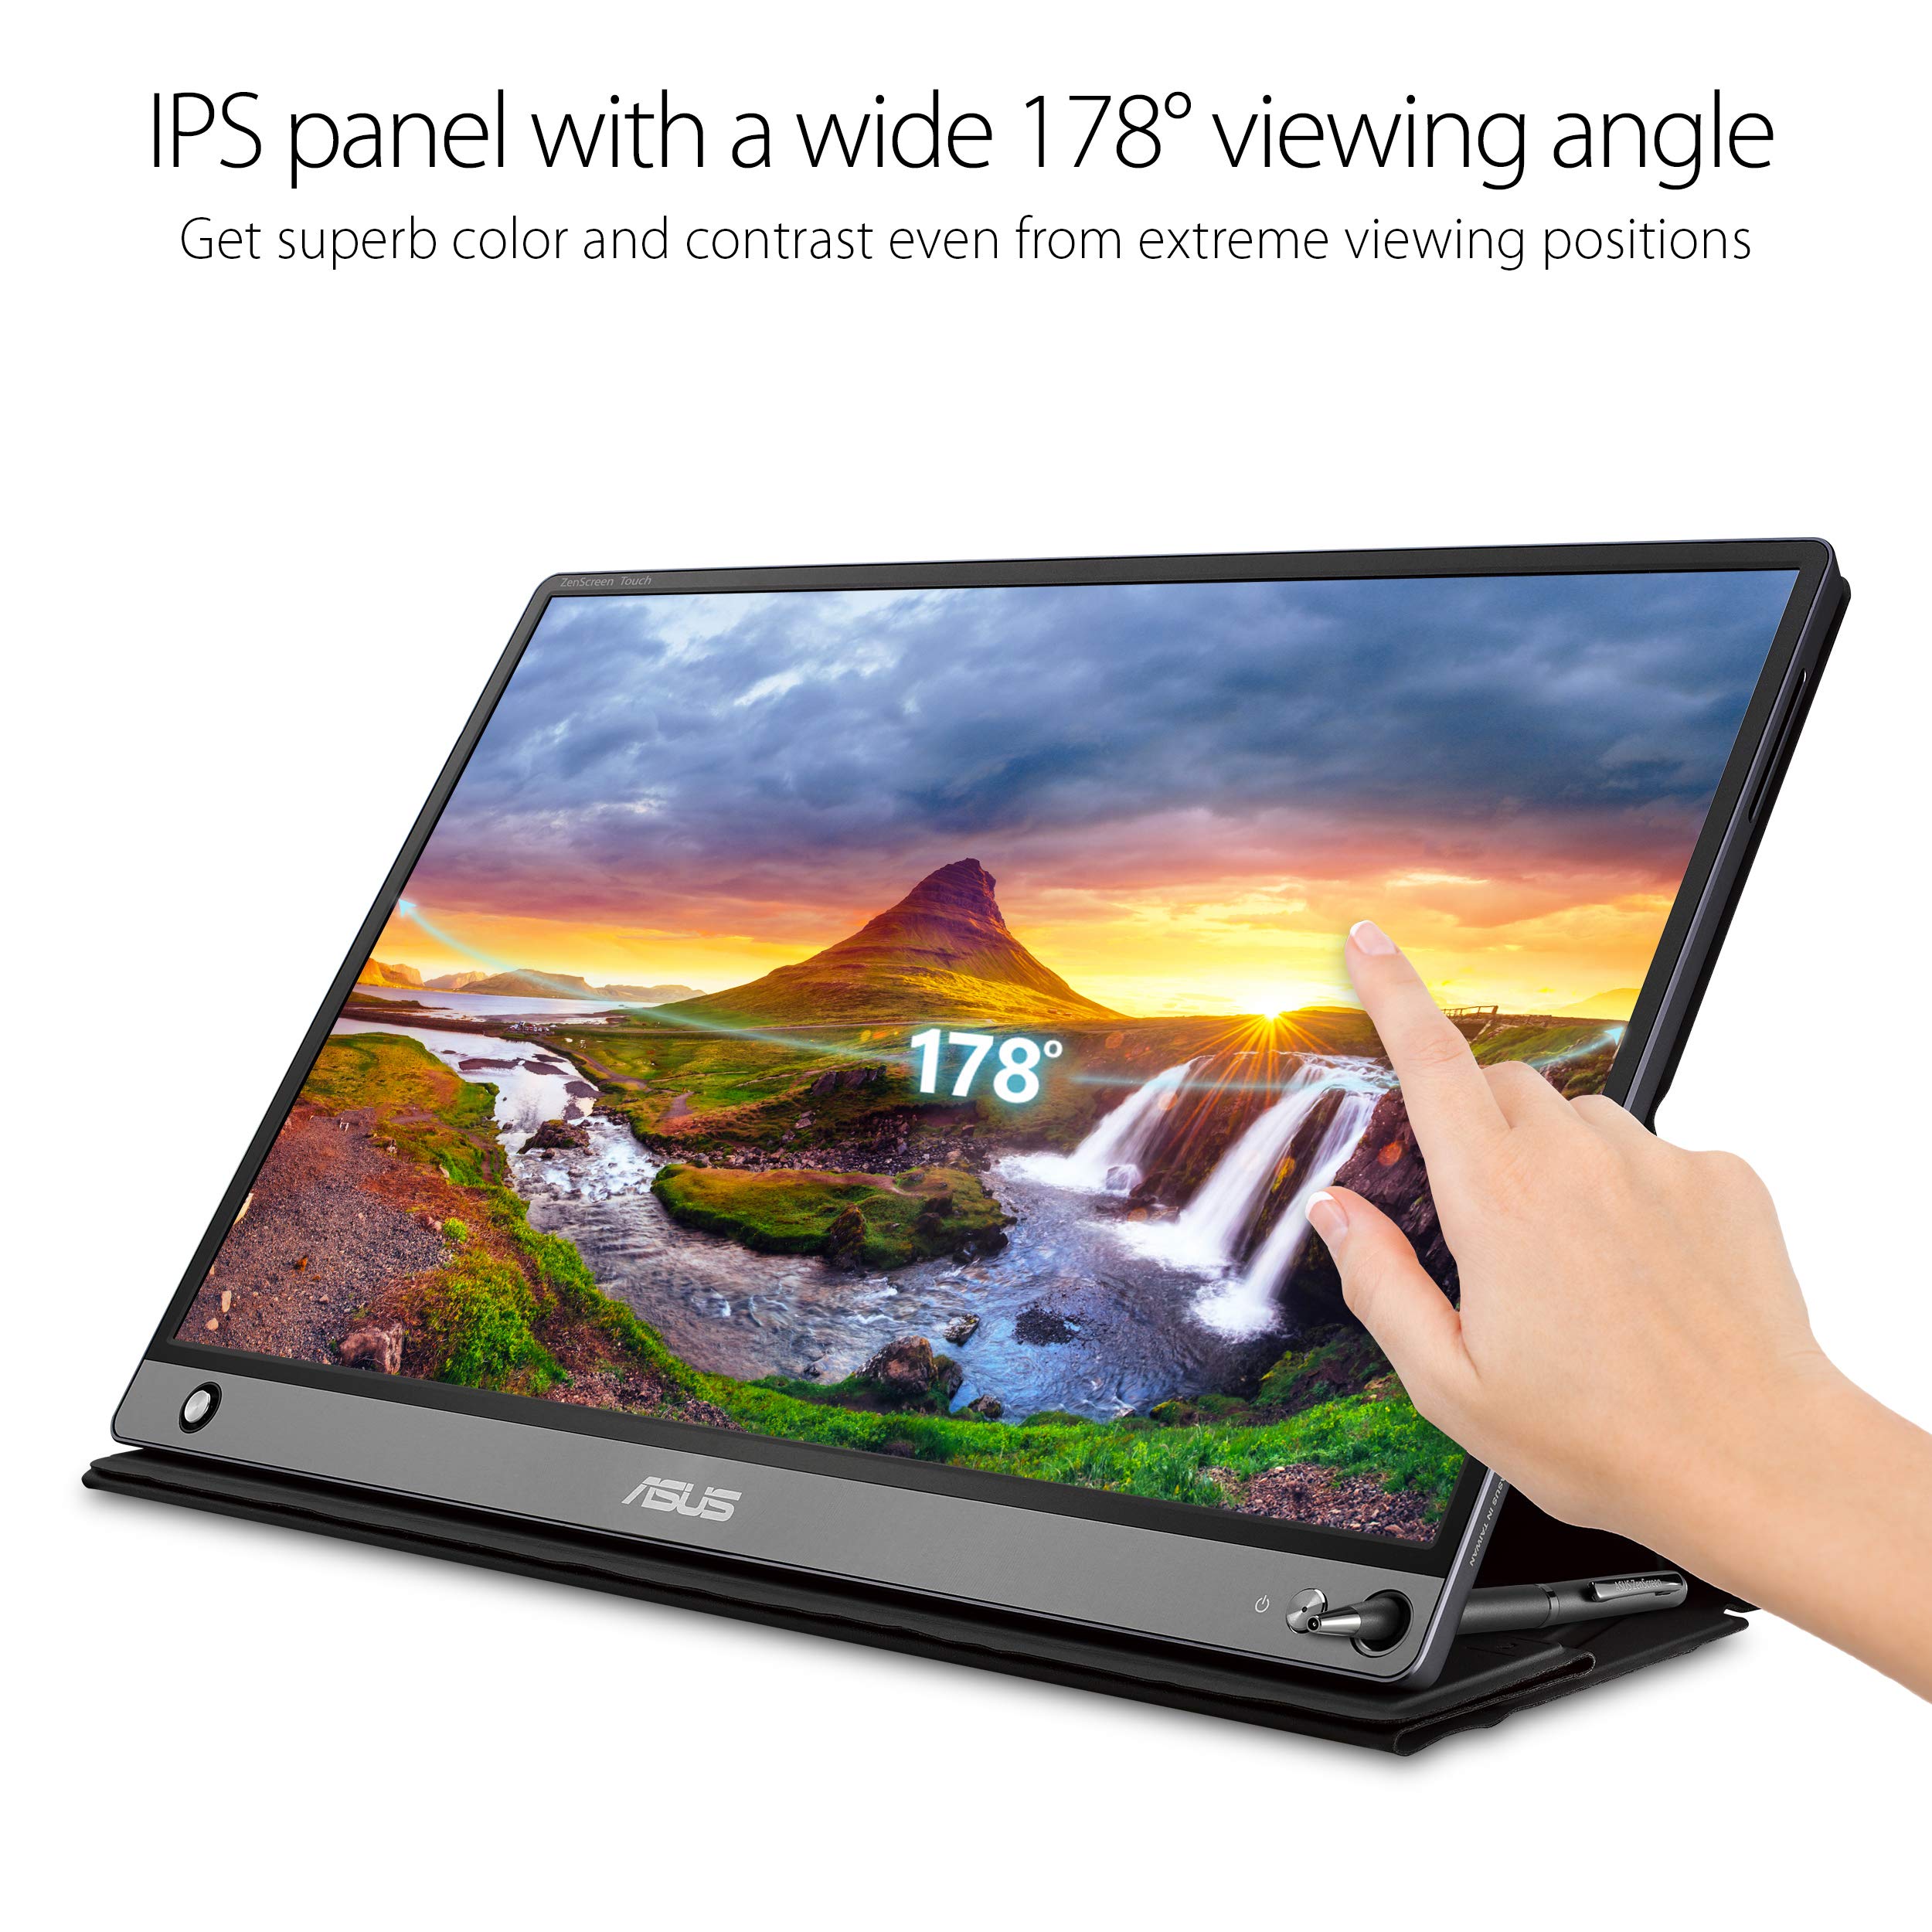 ASUS ZenScreen Touch Screen 15.6” 1080P Portable USB (MB16AMT) - Full HD (1920 x 1080), IPS, Anti-glare, Built-in Battery, Speakers, Eye Care, USB Type-C, Micro HDMI, Smart Case, 3-Year Warranty